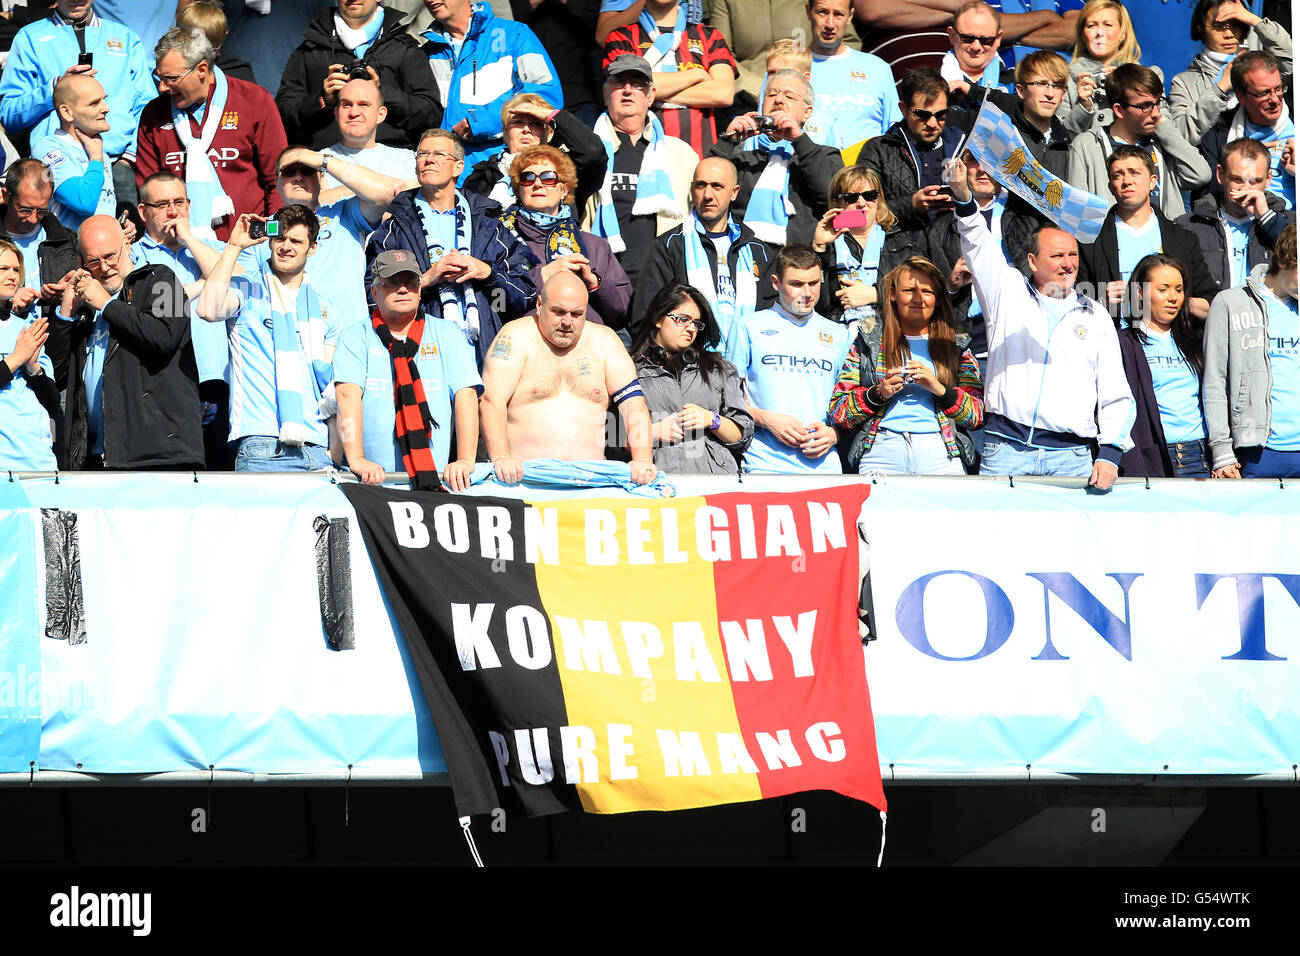 Manchester City fans with a banner that reads 'Born Belgian, Pure Manc, Kompany' Stock Photo